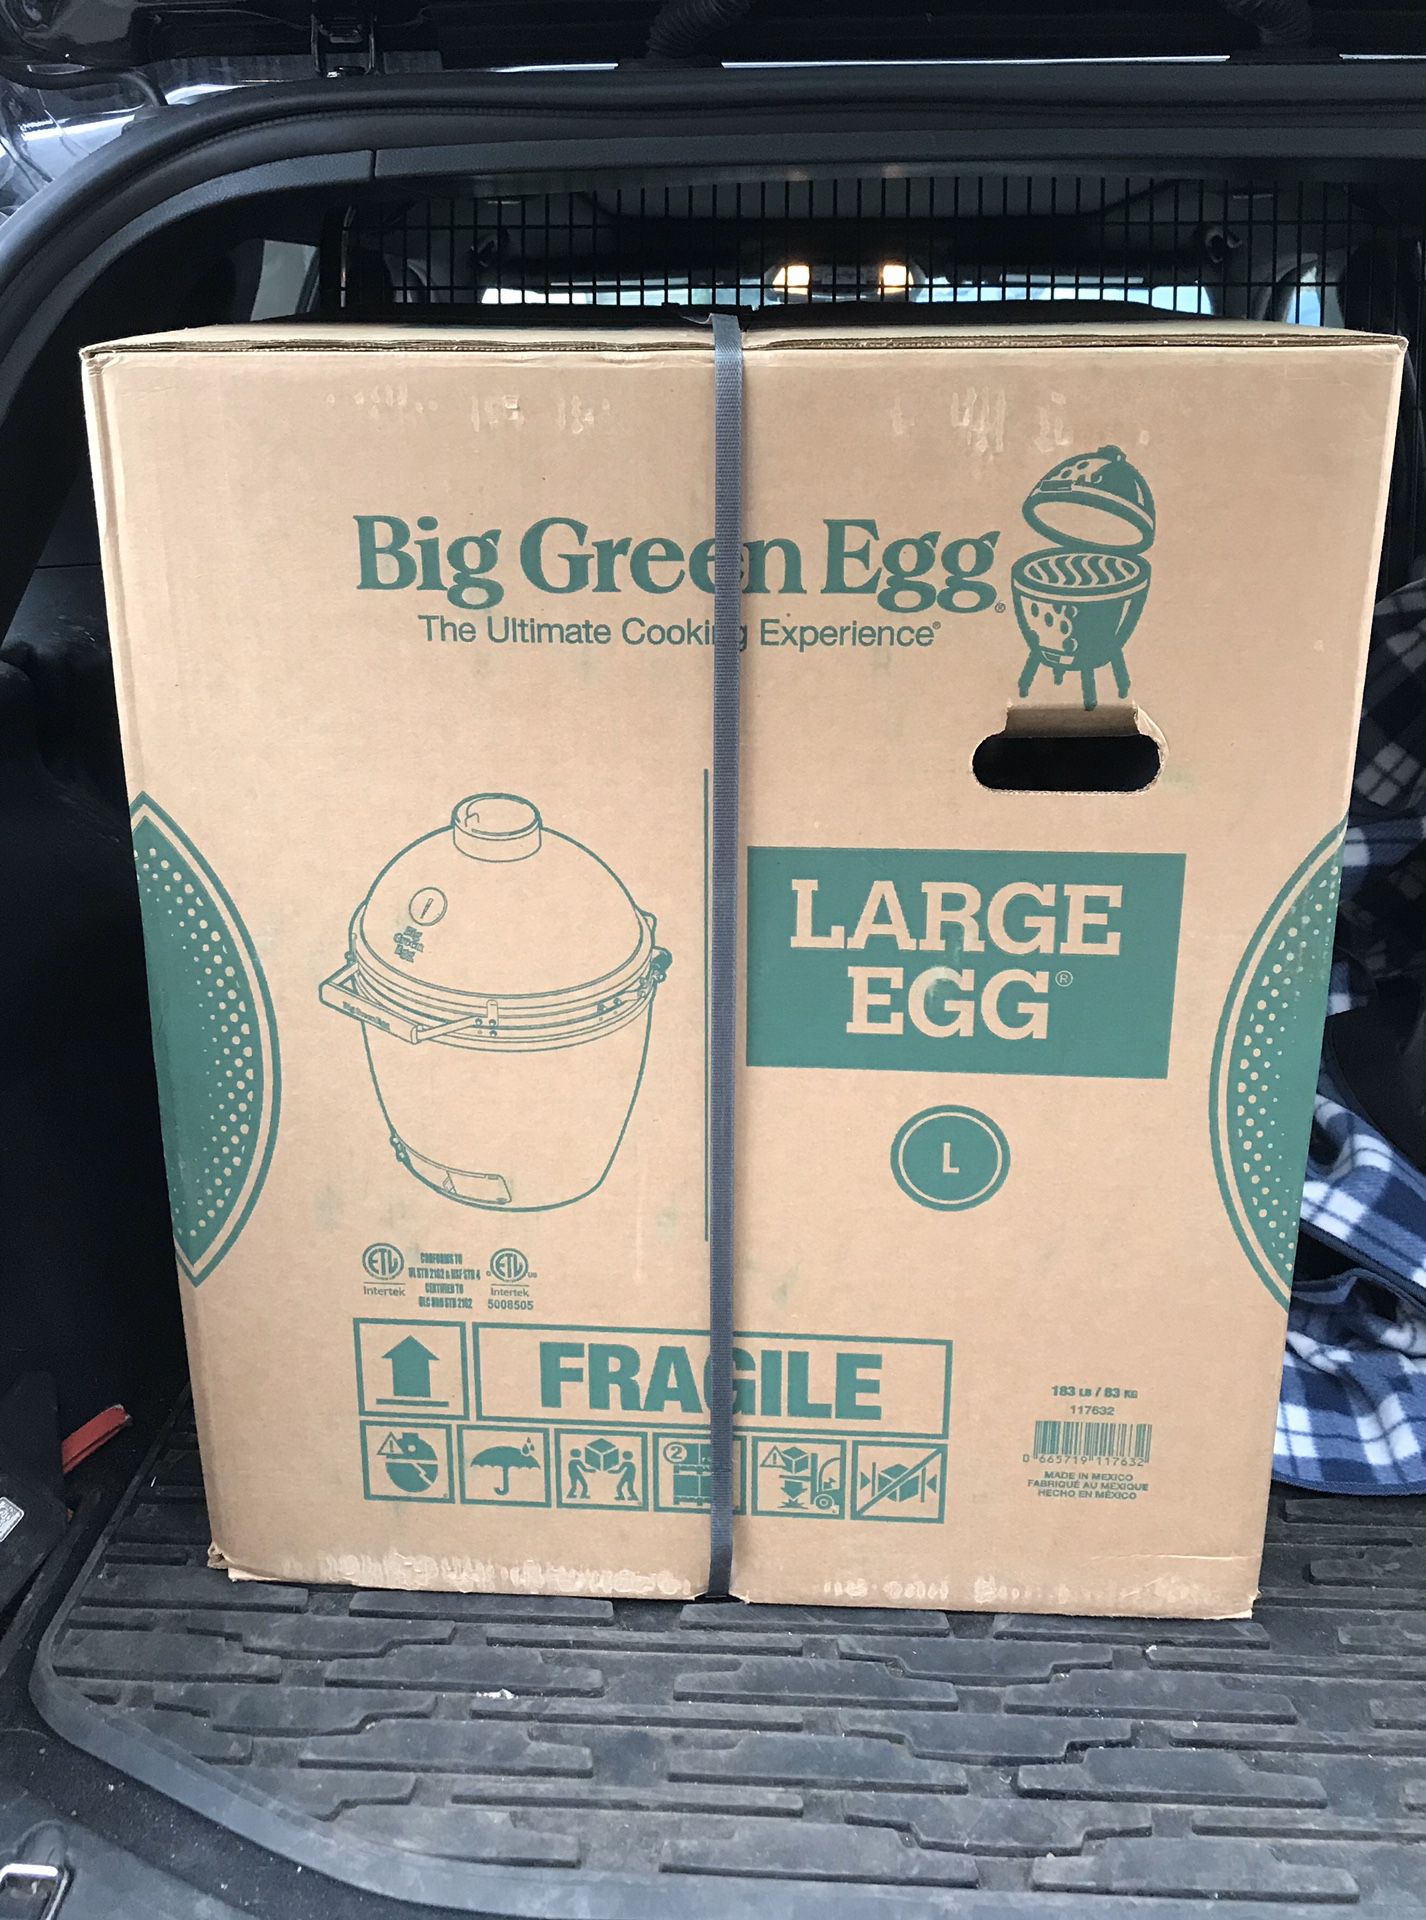 Big green egg Large egg package with everything..